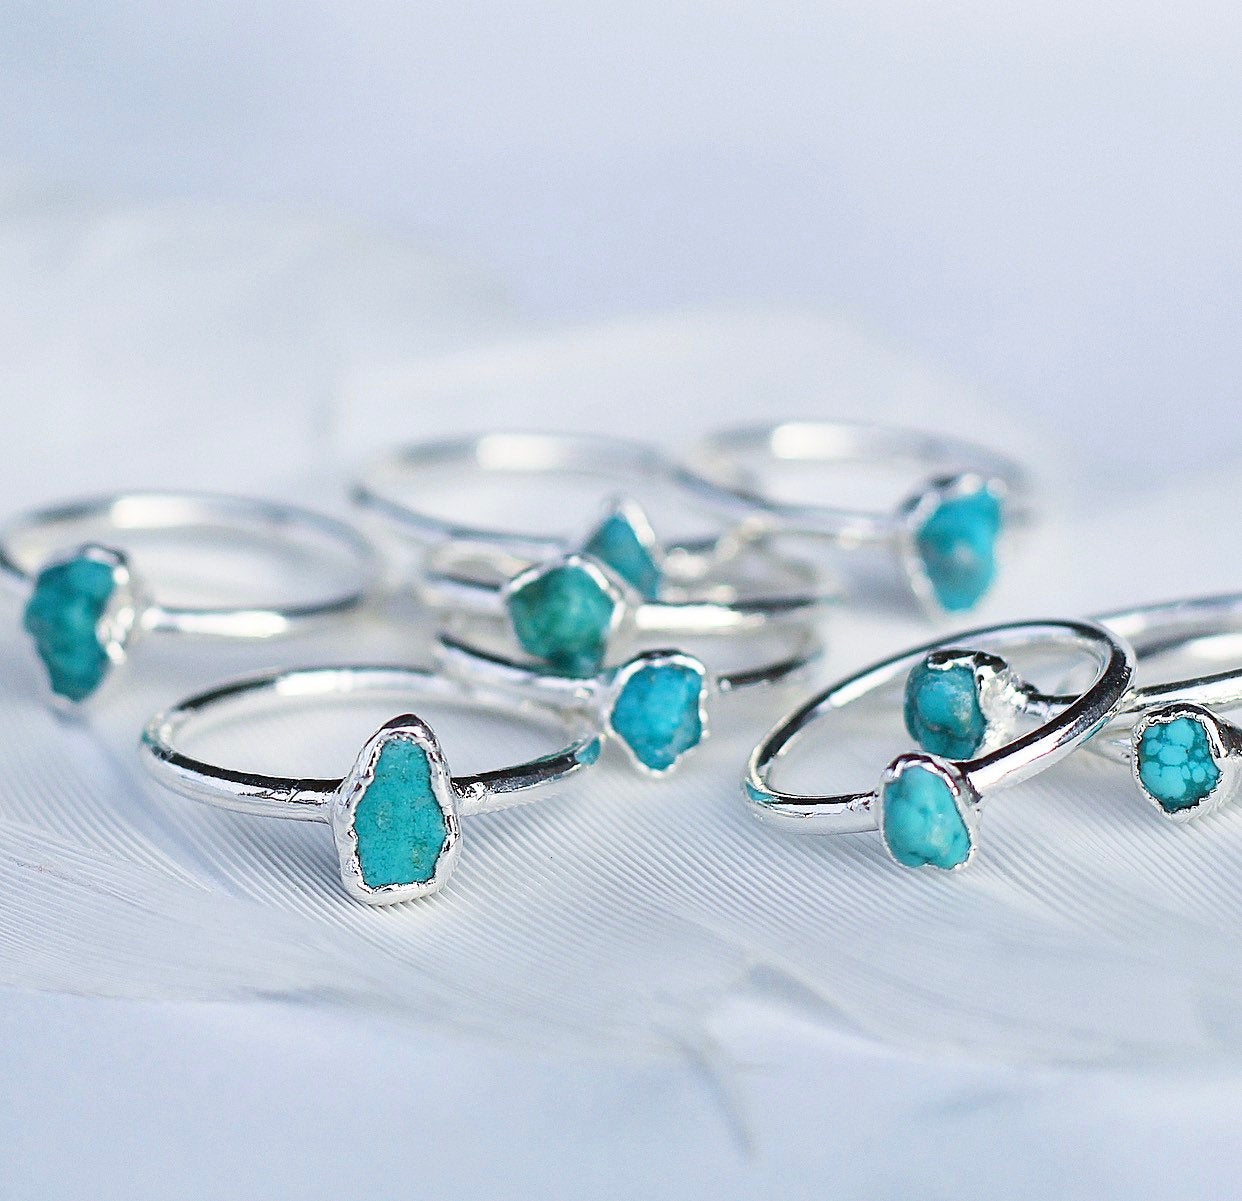 Raw Turquoise Ring Silver, December Birthstone Silver Band, December Raw Gemstone Ring, Raw Turquoise Stone Ring, December Gemstone Gift